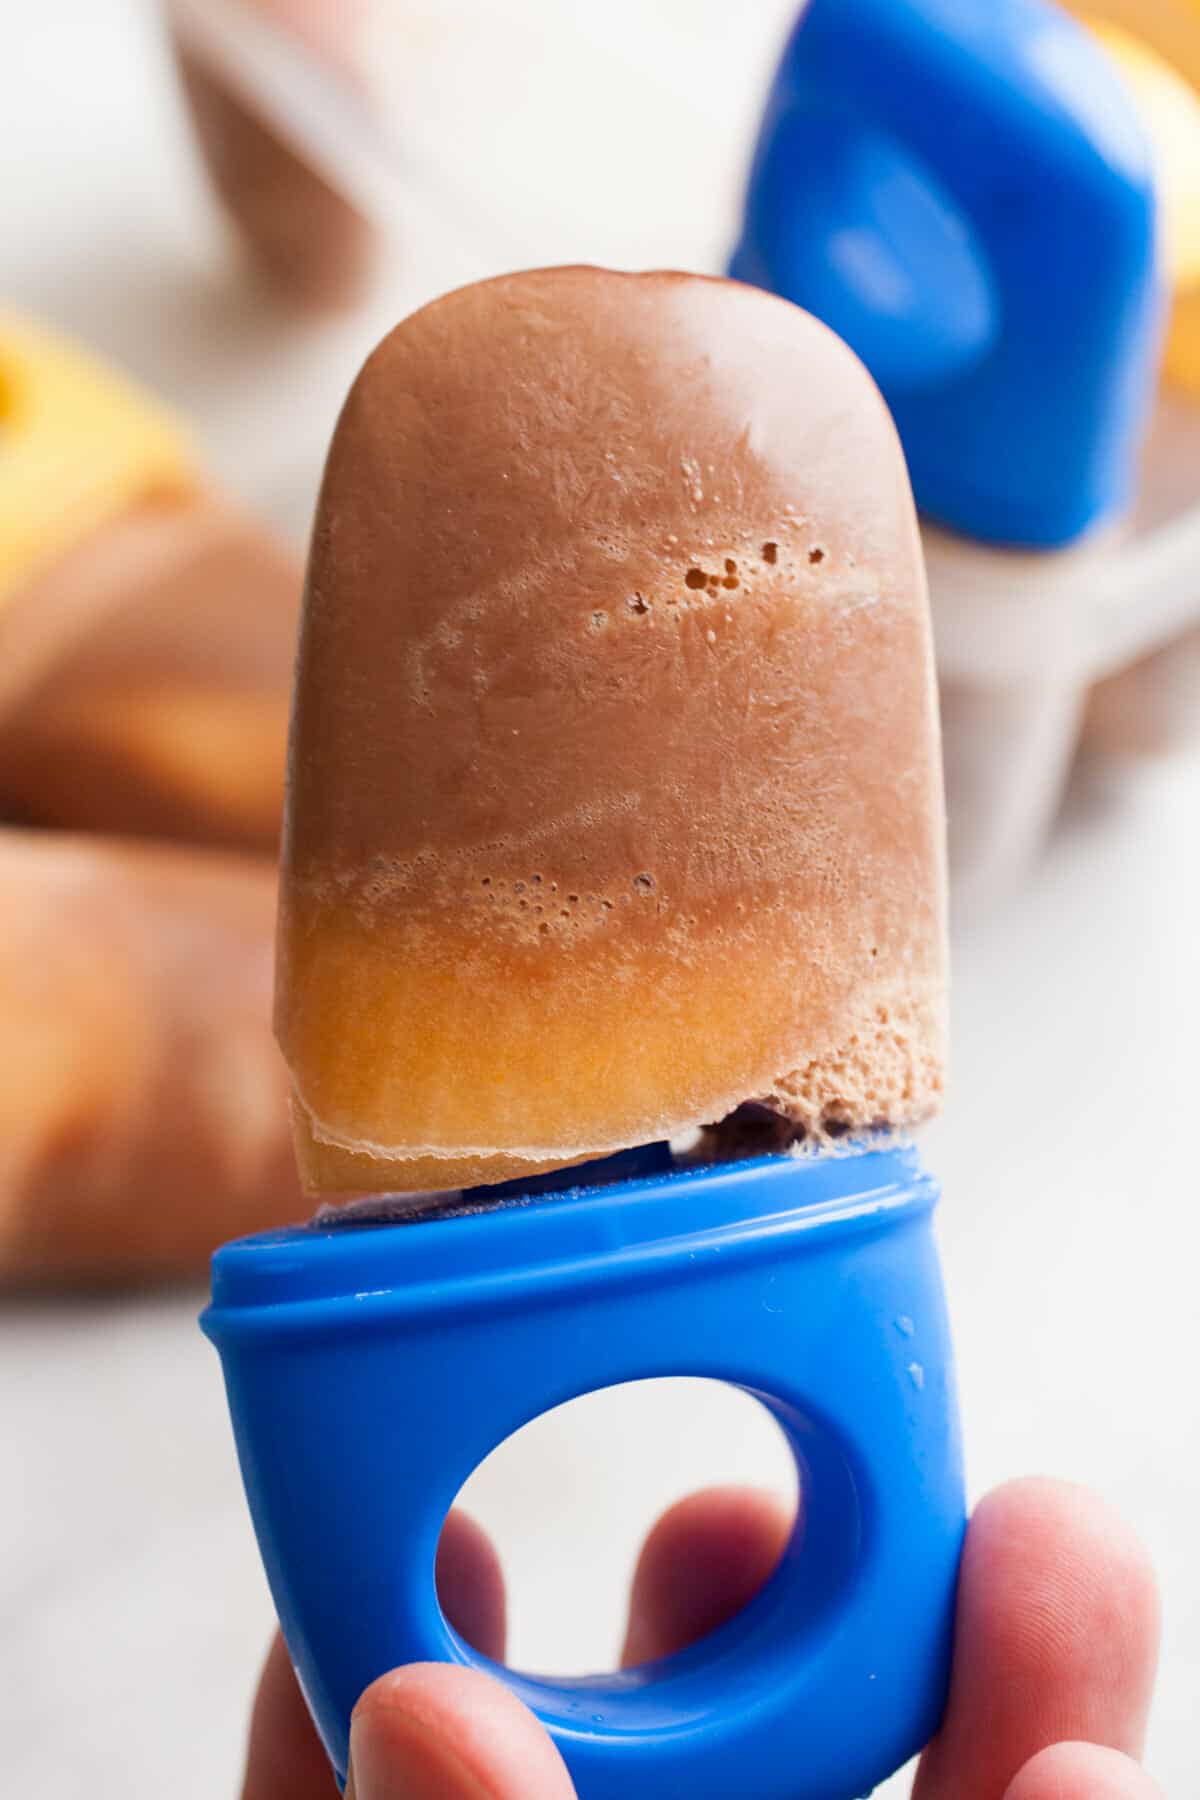 Cantaloupe Pudding Pops: These refreshing and easy fudge pops have a cantaloupe swirl throughout for a fresh melon flavor that goes great with the rich chocolate pudding pop! Chill out, people! | macheesmo.com